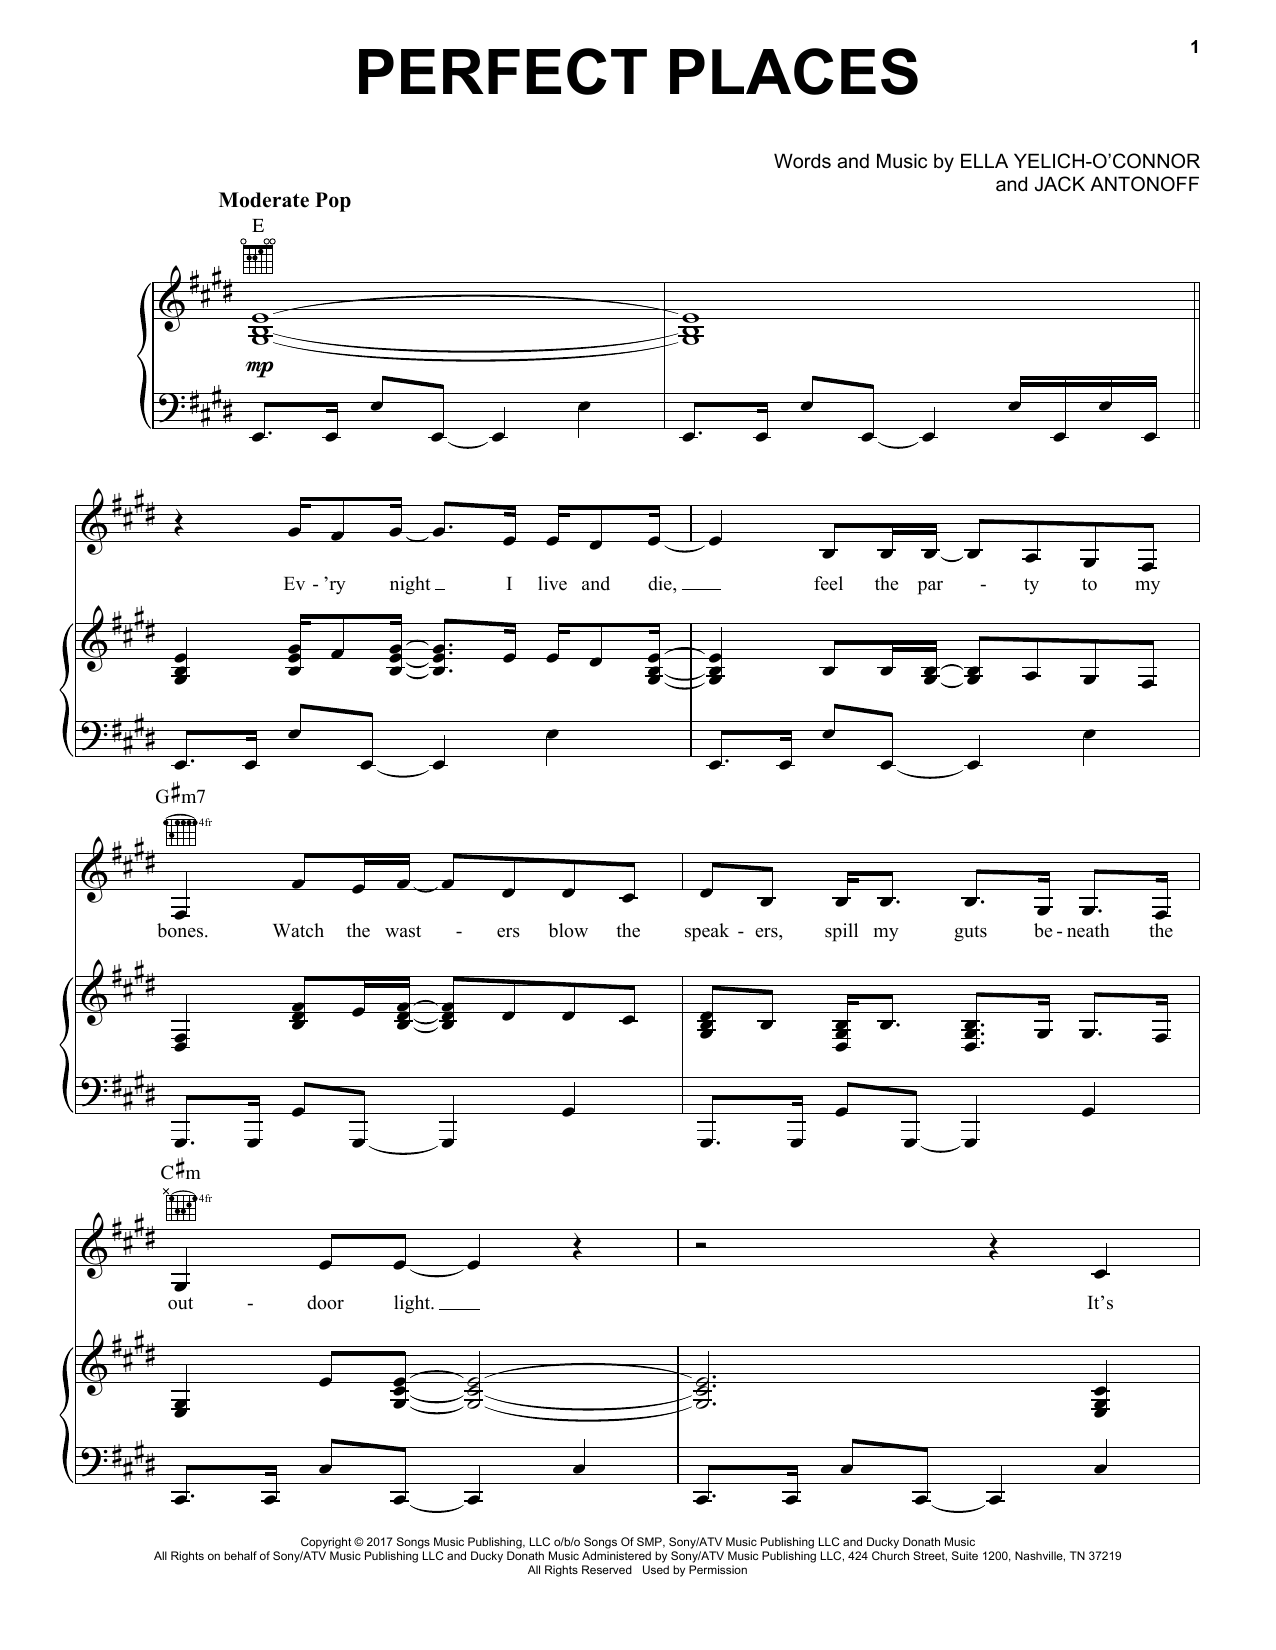 Download Lorde Perfect Places Sheet Music